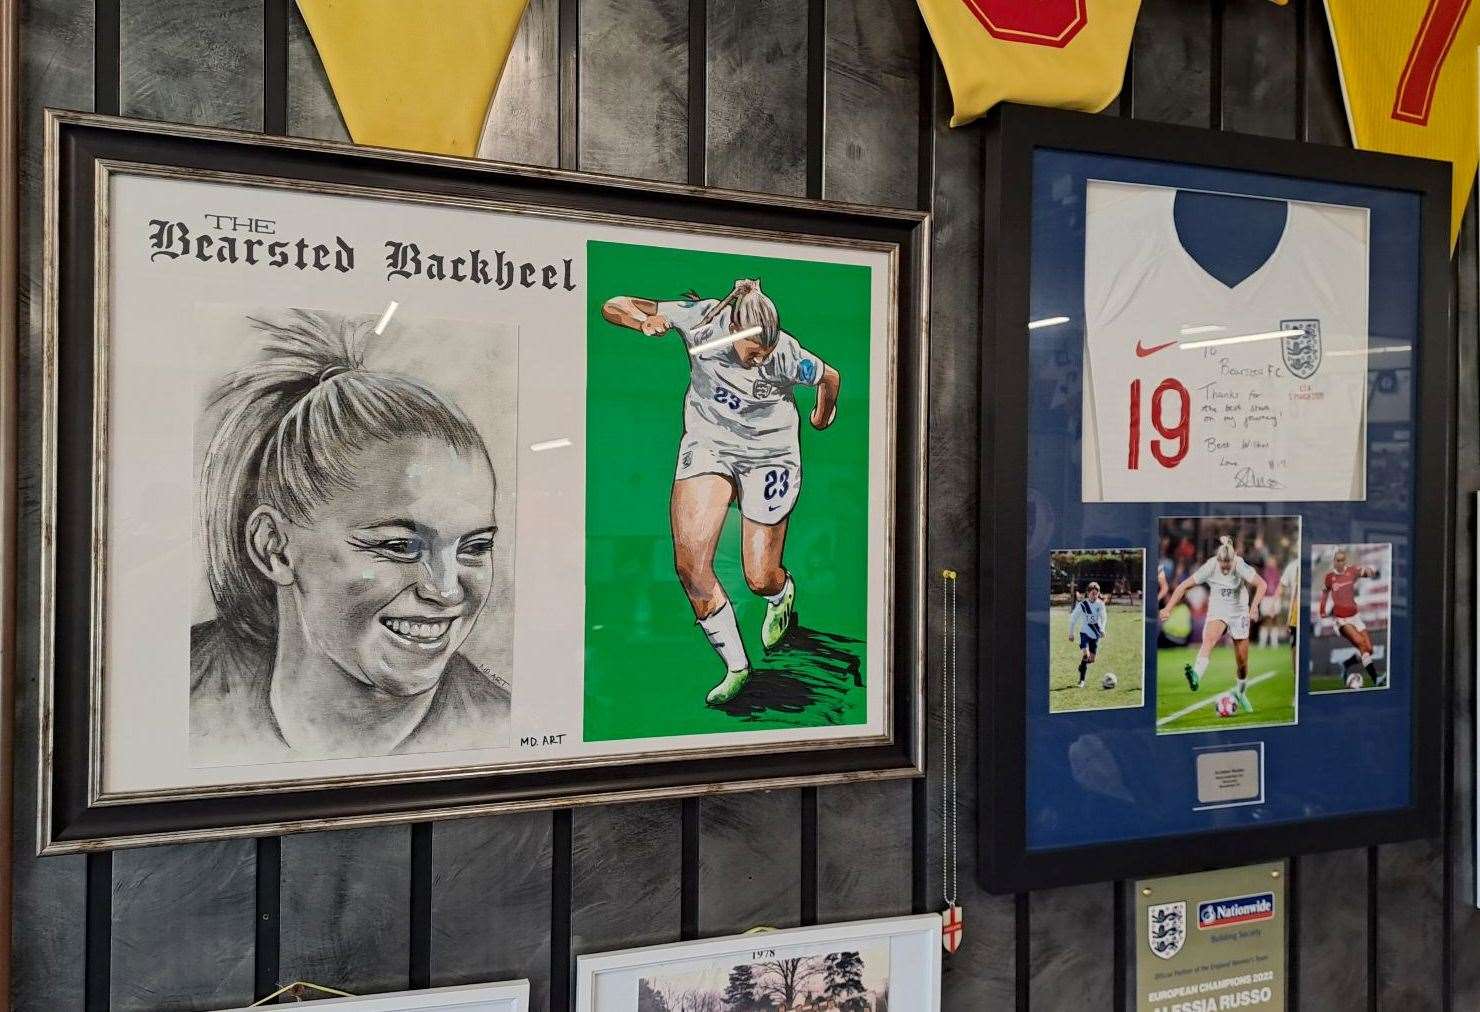 A drawing of Alessia Russo hangs on Bearsted Football Club's wall remembering her famous backheel goal